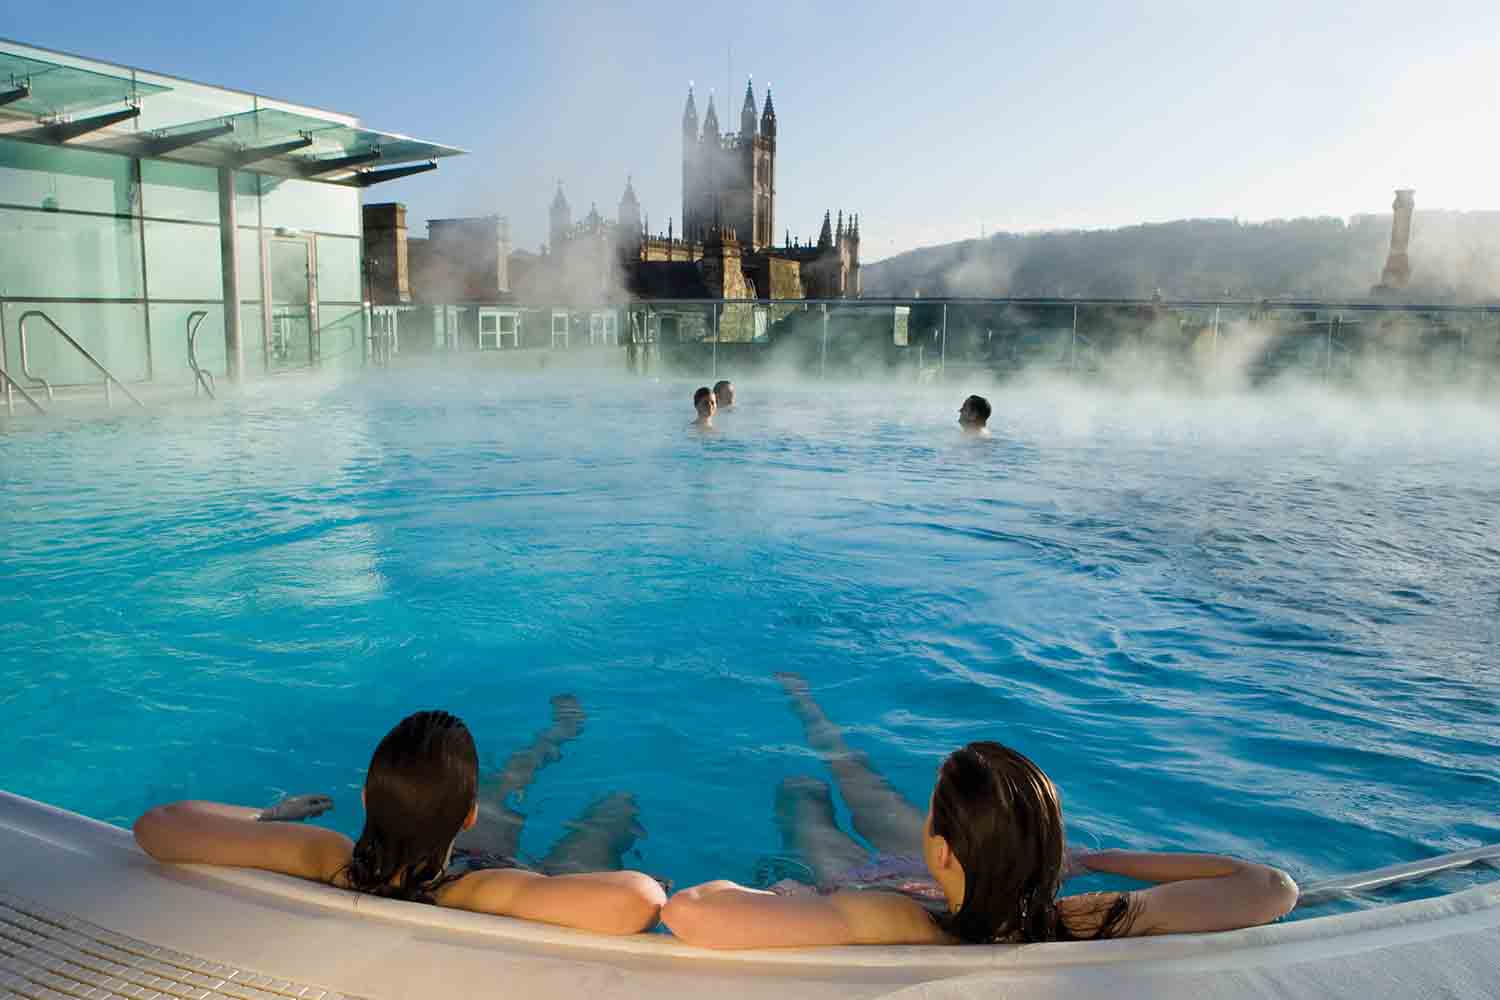 Two people relax in the steaming spa waters of the rooftop spa bath